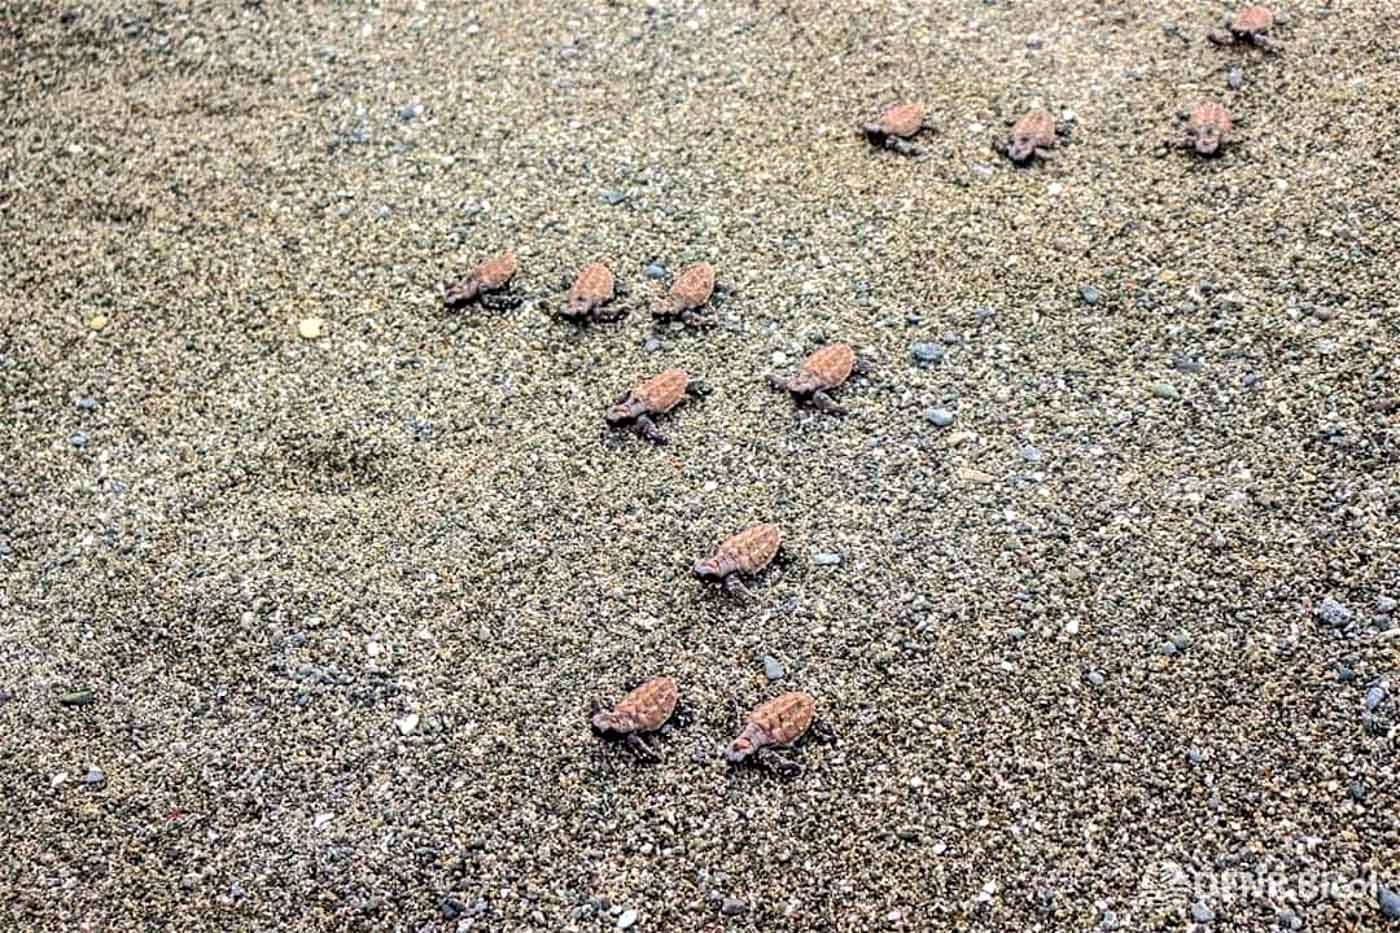 RACE TO SEA. Some of the 95 hatchlings released by environment officials. Photo courtesy of DENR Bicol  